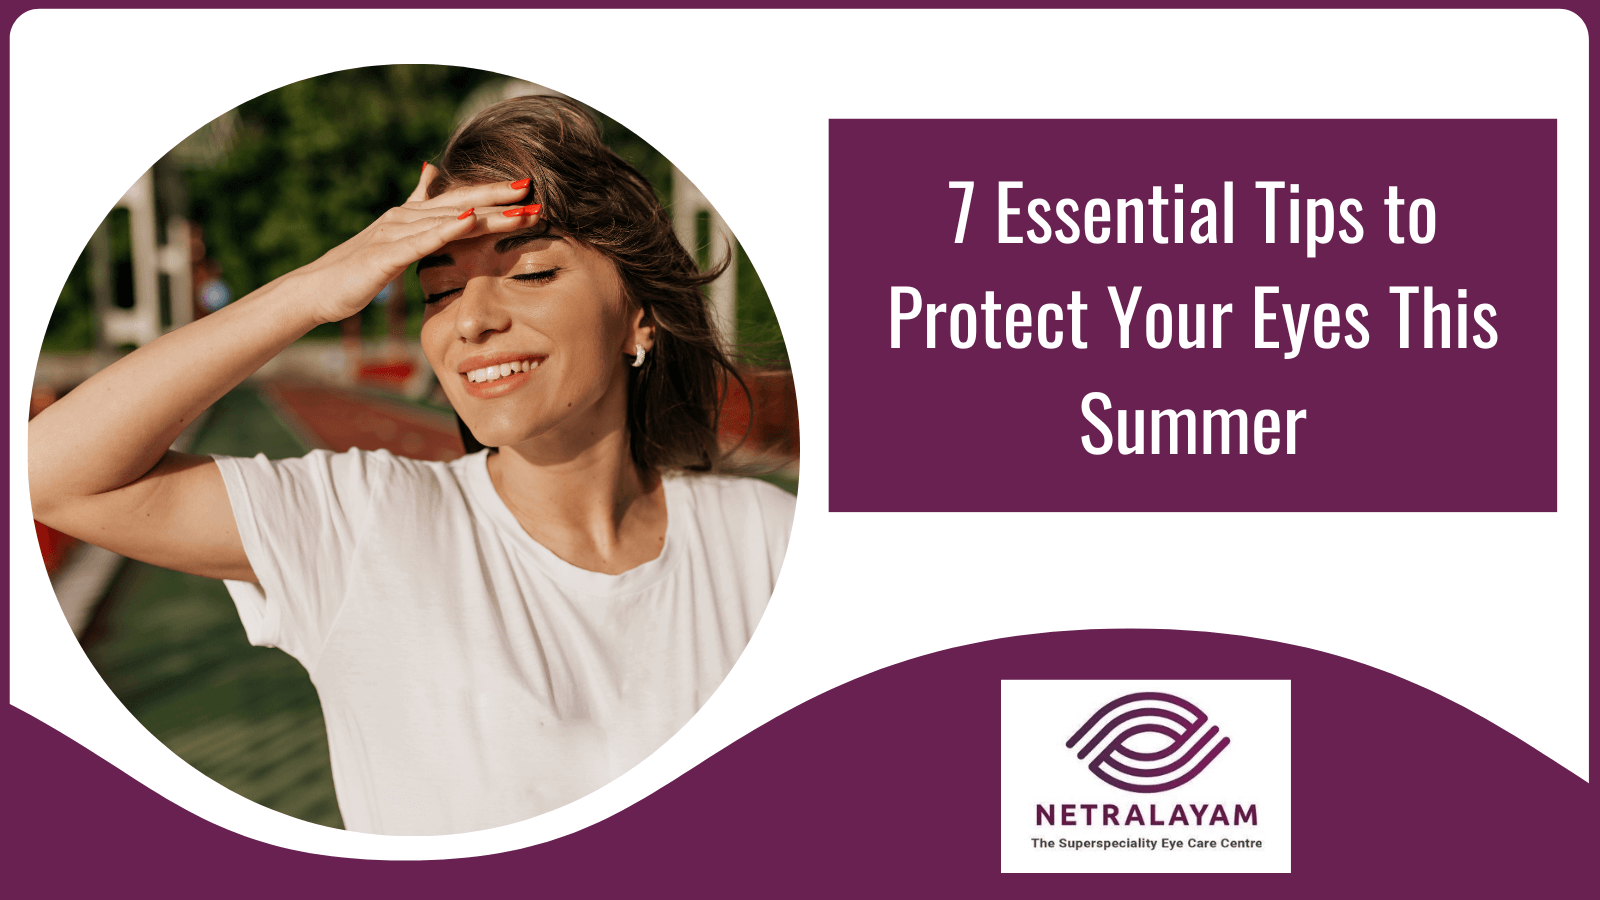 7 Essential Tips to Protect Your Eyes This Summer